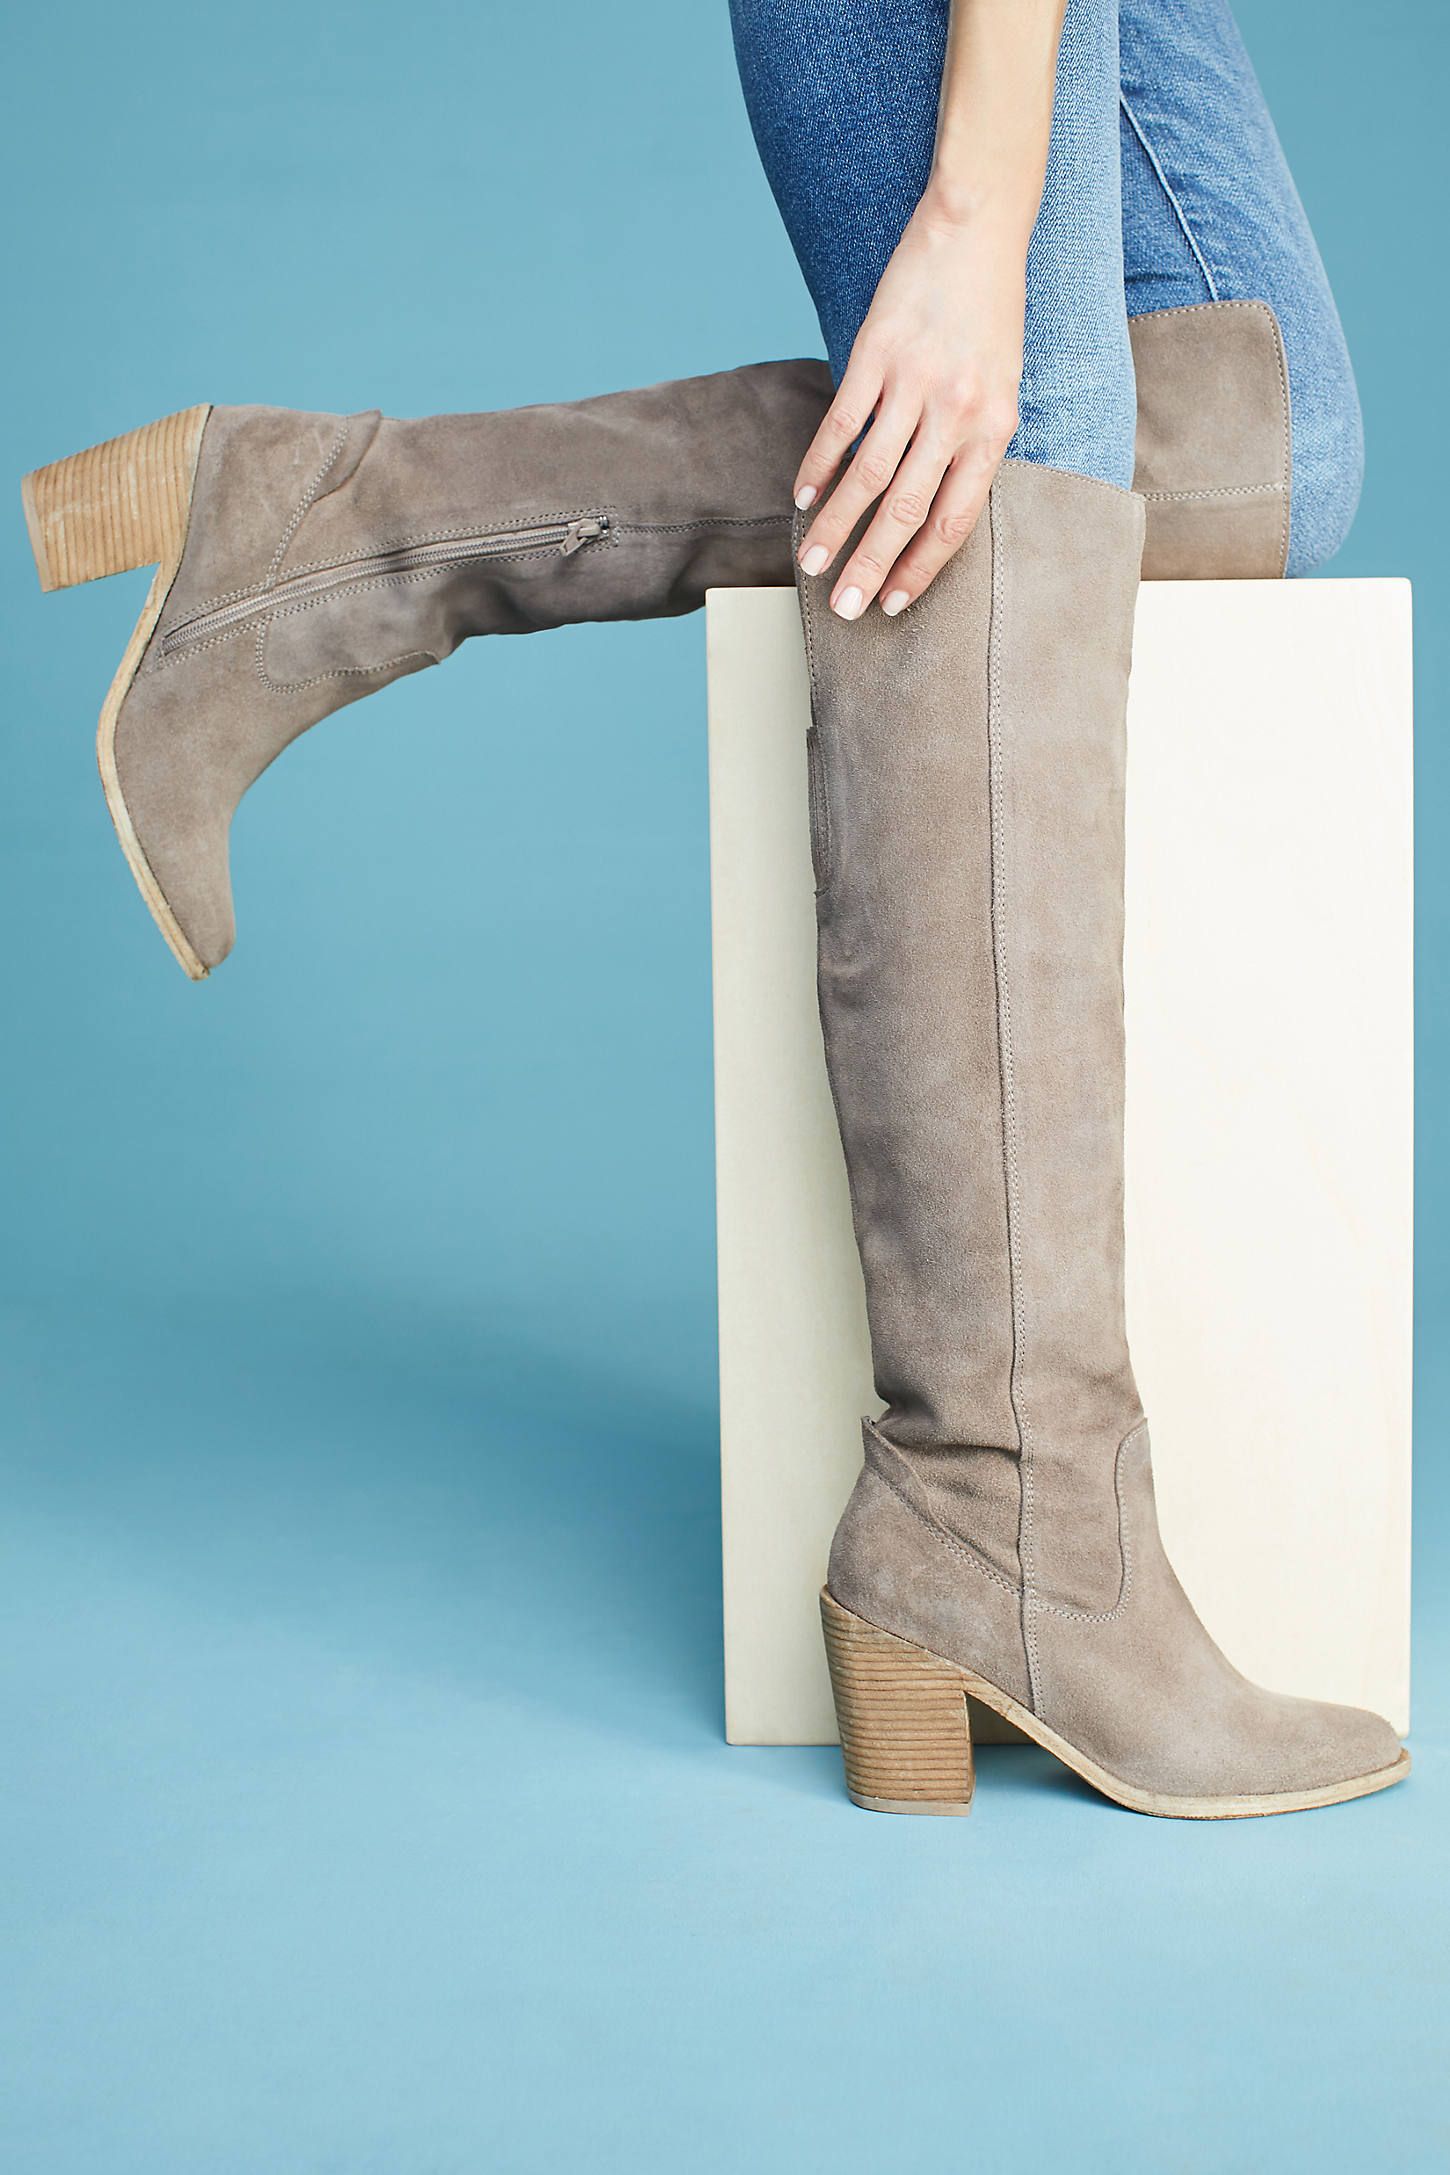 Jeffrey Campbell Kalanka Over-The-Knee Boots | Anthropologie (US)